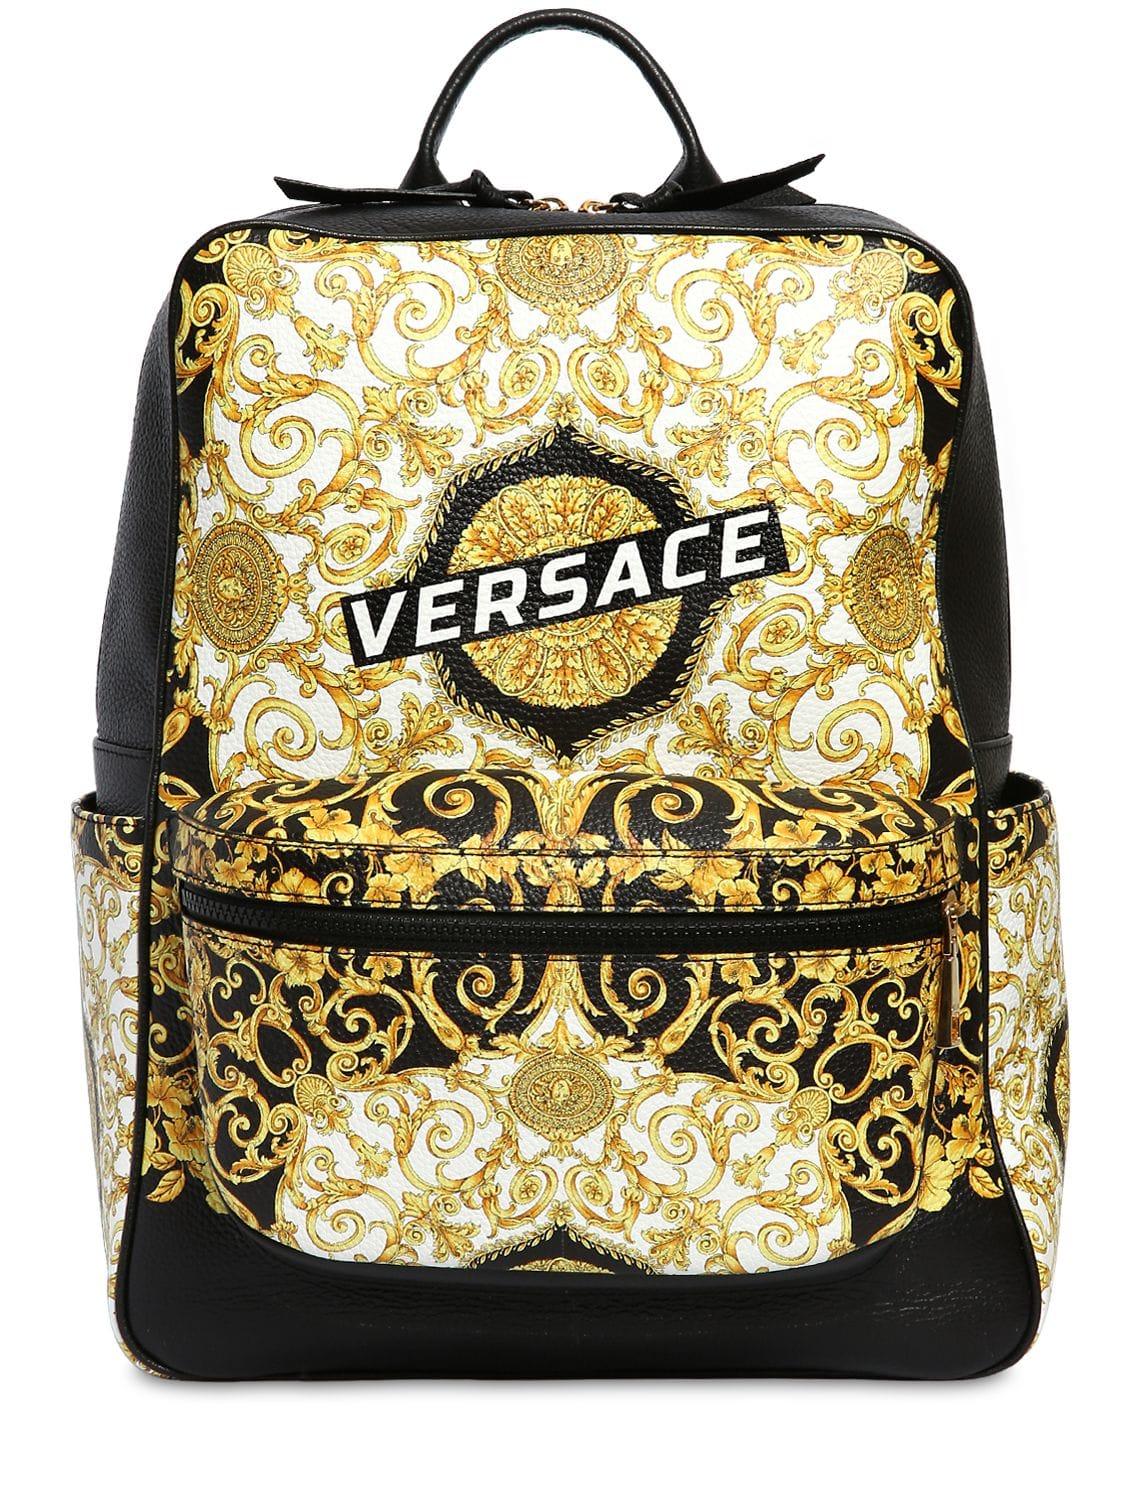 Black and Gold Versace Logo - Versace Logo Baroque Print Leather Backpack In Black/Gold ...